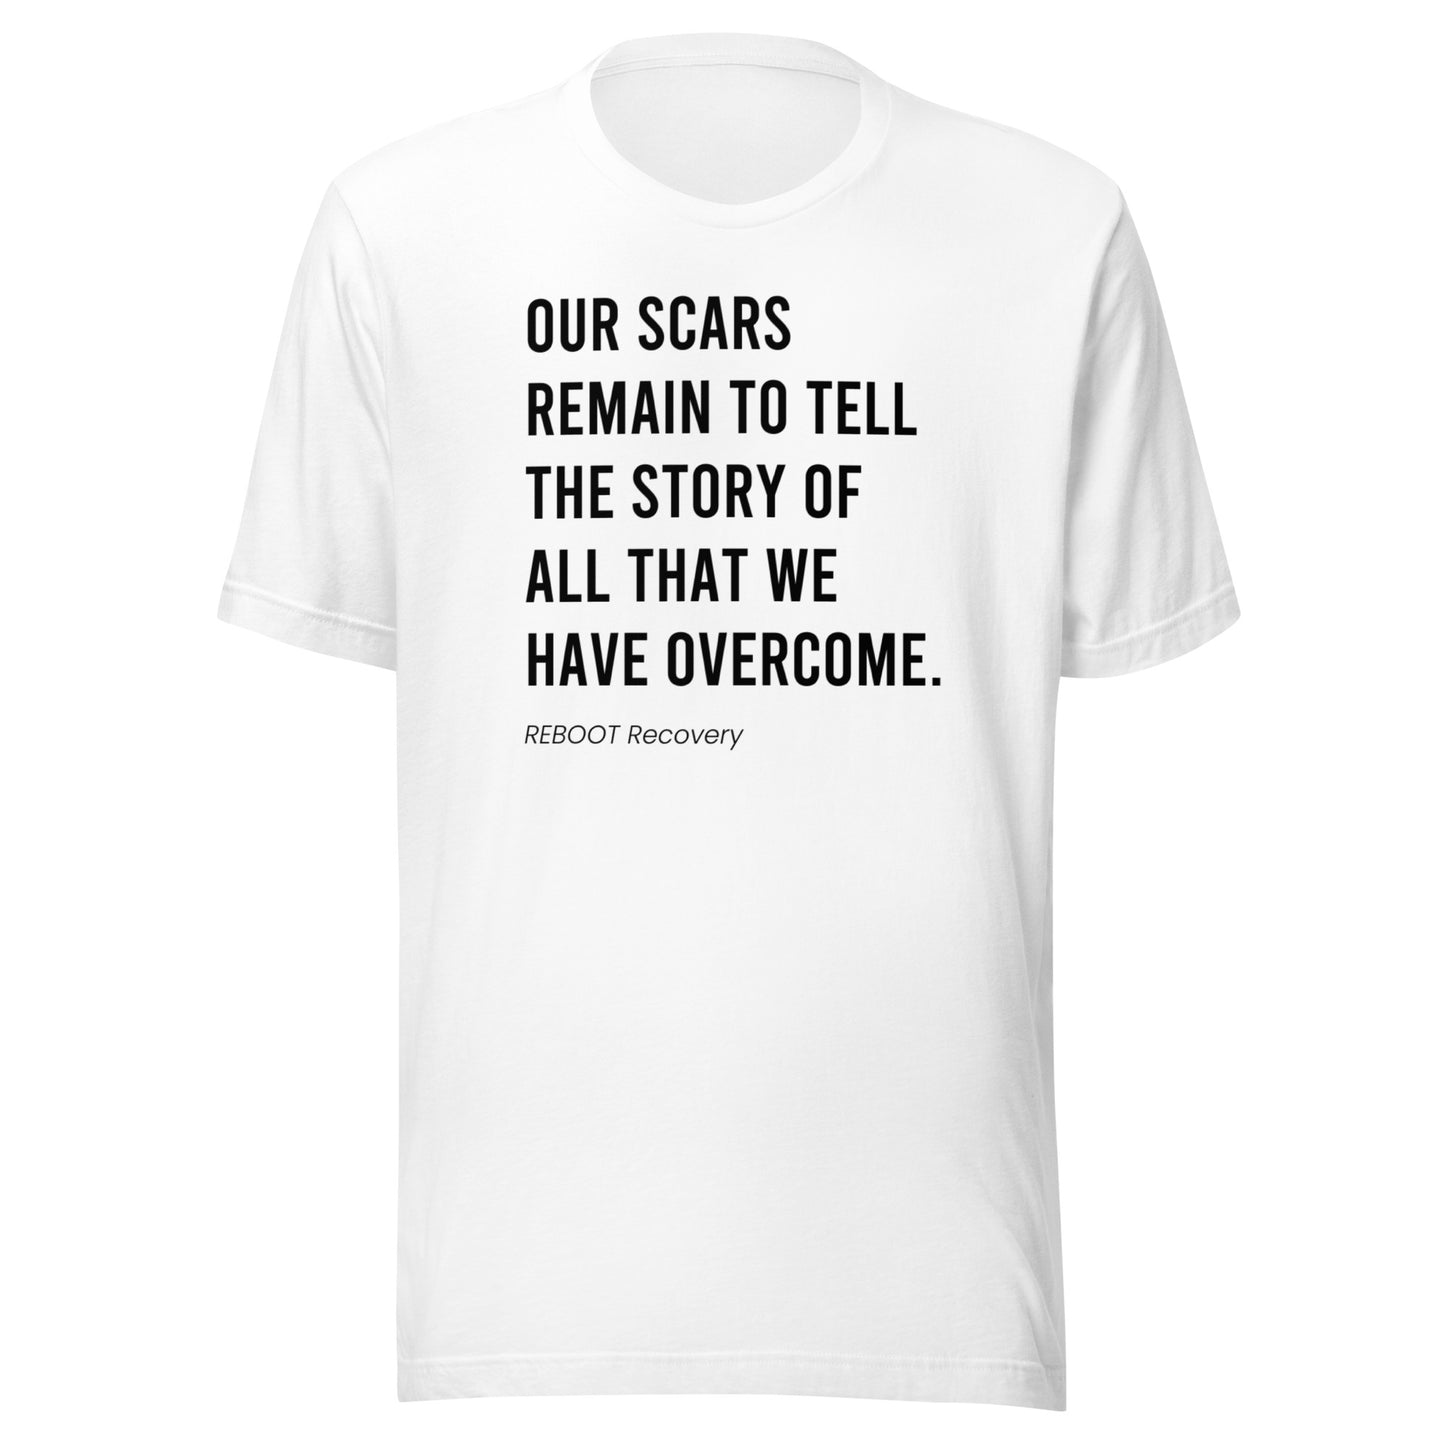 SESSION 9: Share Your Story T-Shirt